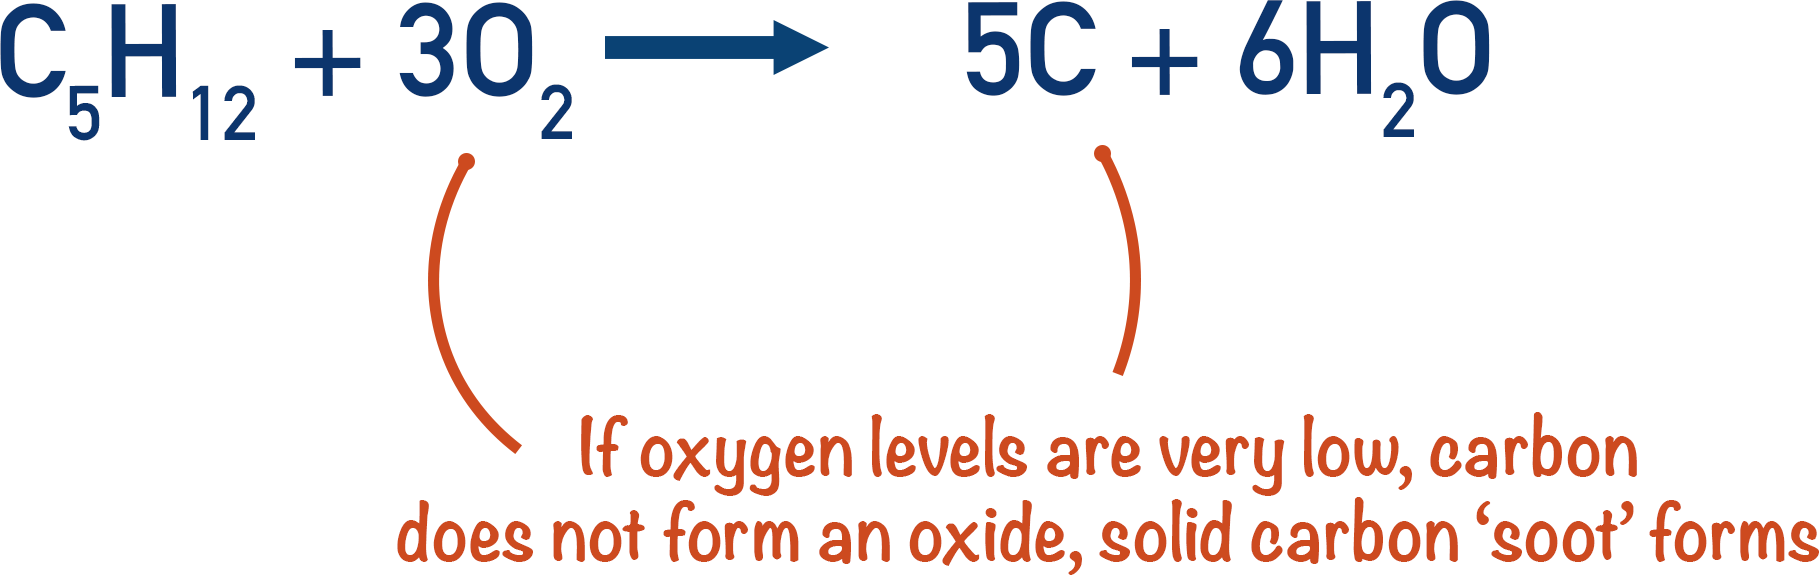 incomplete combustion of alkanes pentane and oxygen to form carbon and water